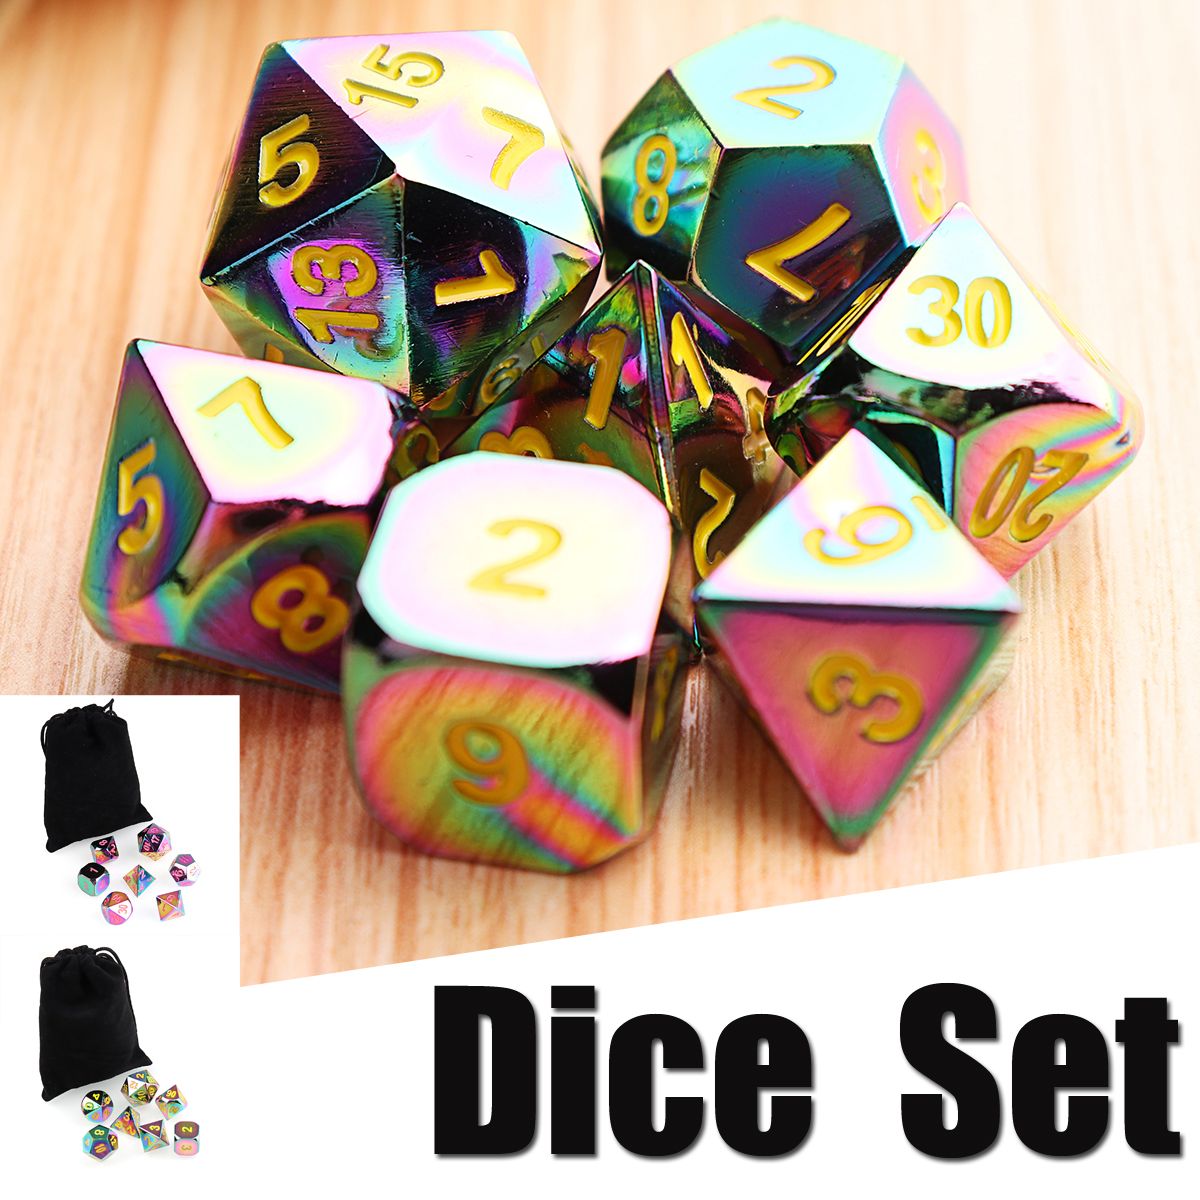 7Pcs-Embossed-Heavy-Metal-Polyhedral-Dice-DND-RPG-MTG-Role-Playing-Game-with-Bag-1314618